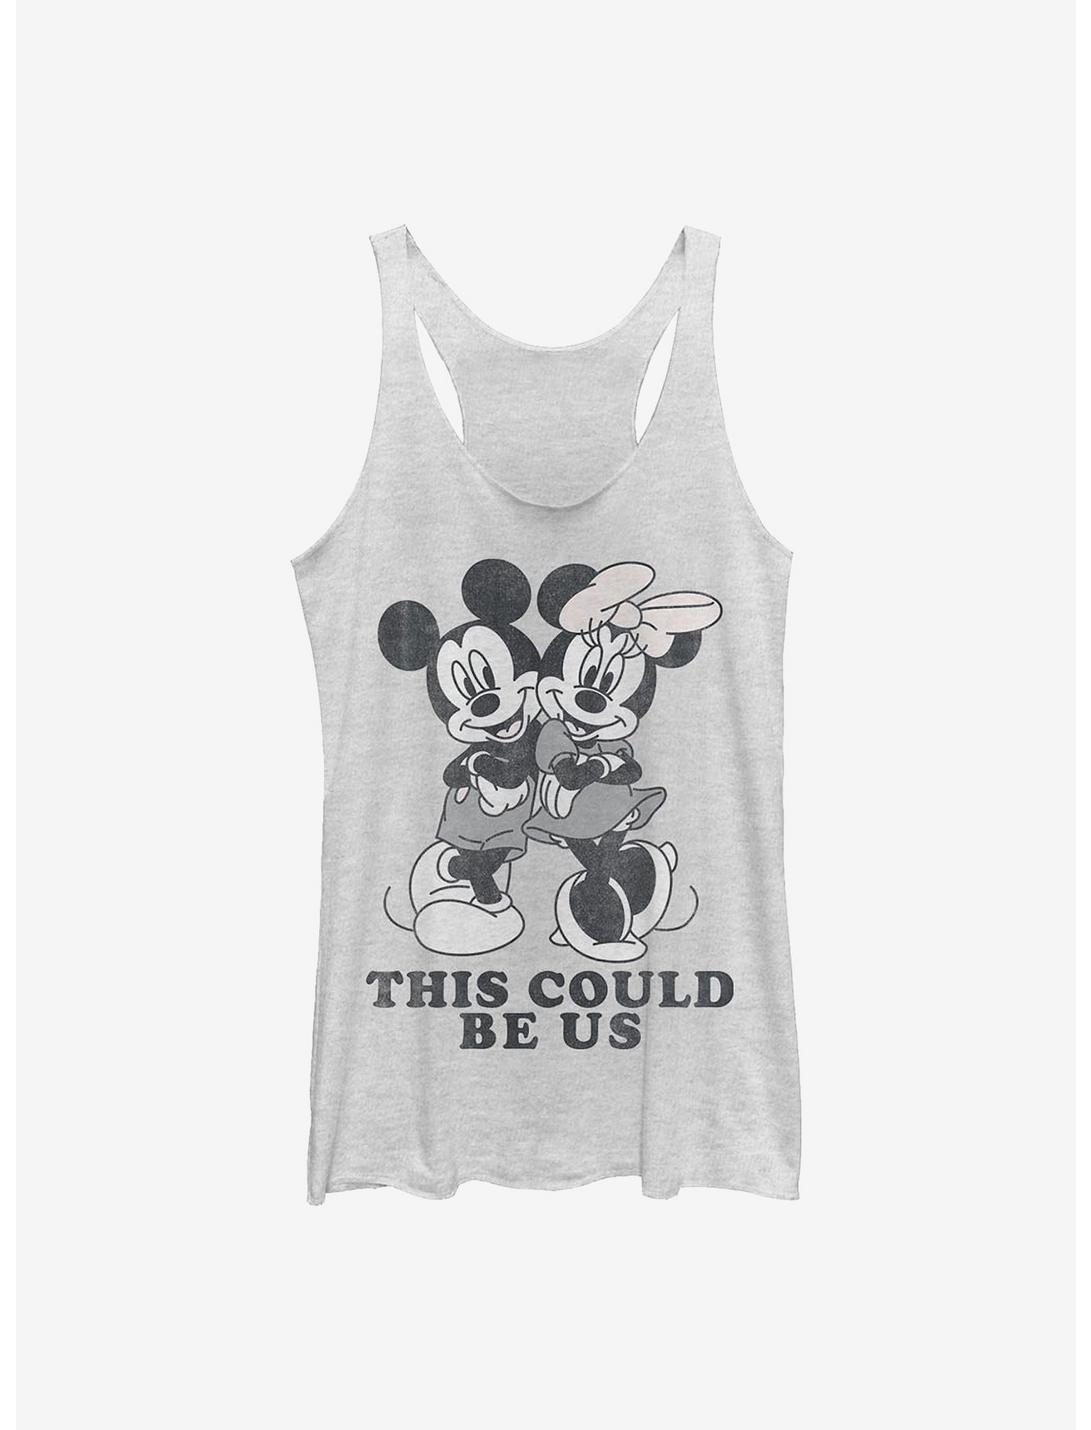 Disney Mickey Mouse Could Be Us Womens Tank Top, WHITE HTR, hi-res